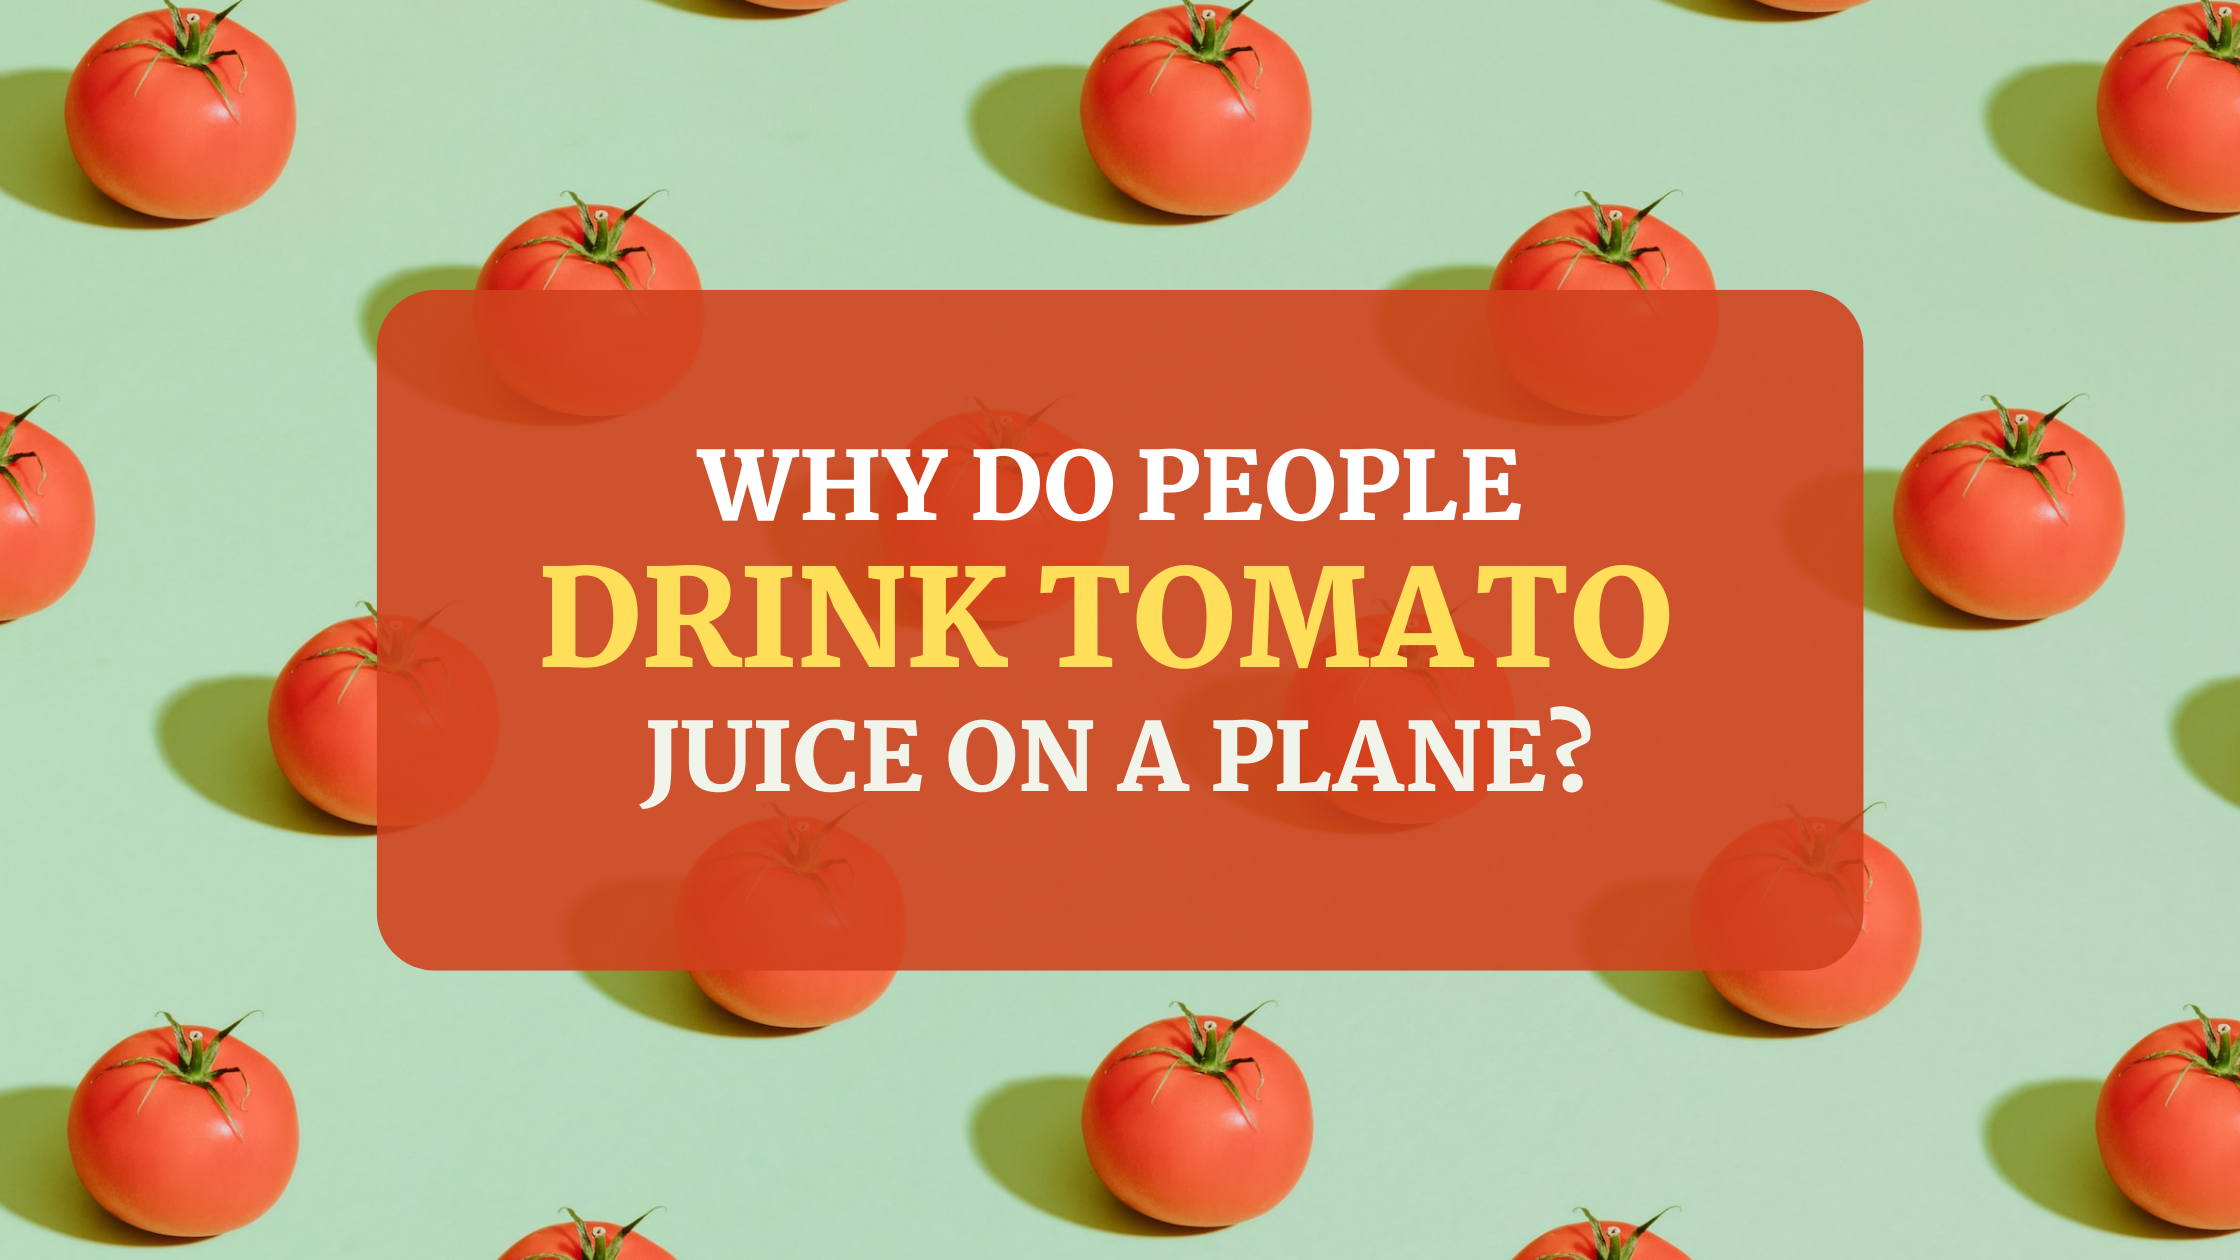 Why Do People Drink Tomato Juice On A Plane?